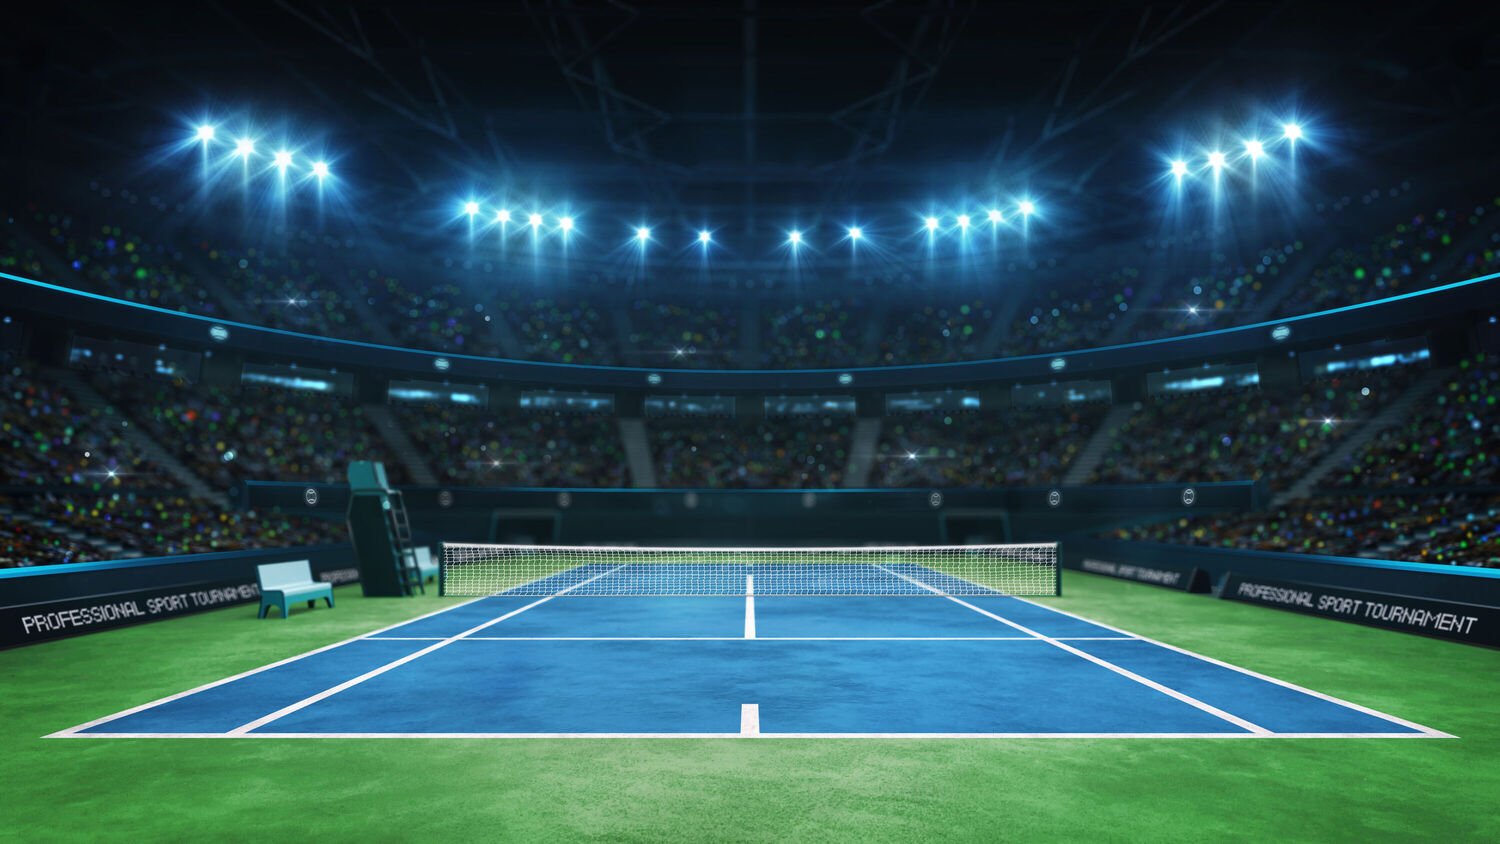 Blue tennis court and illuminated indoor arena with fans, upper front view, professional tennis sport